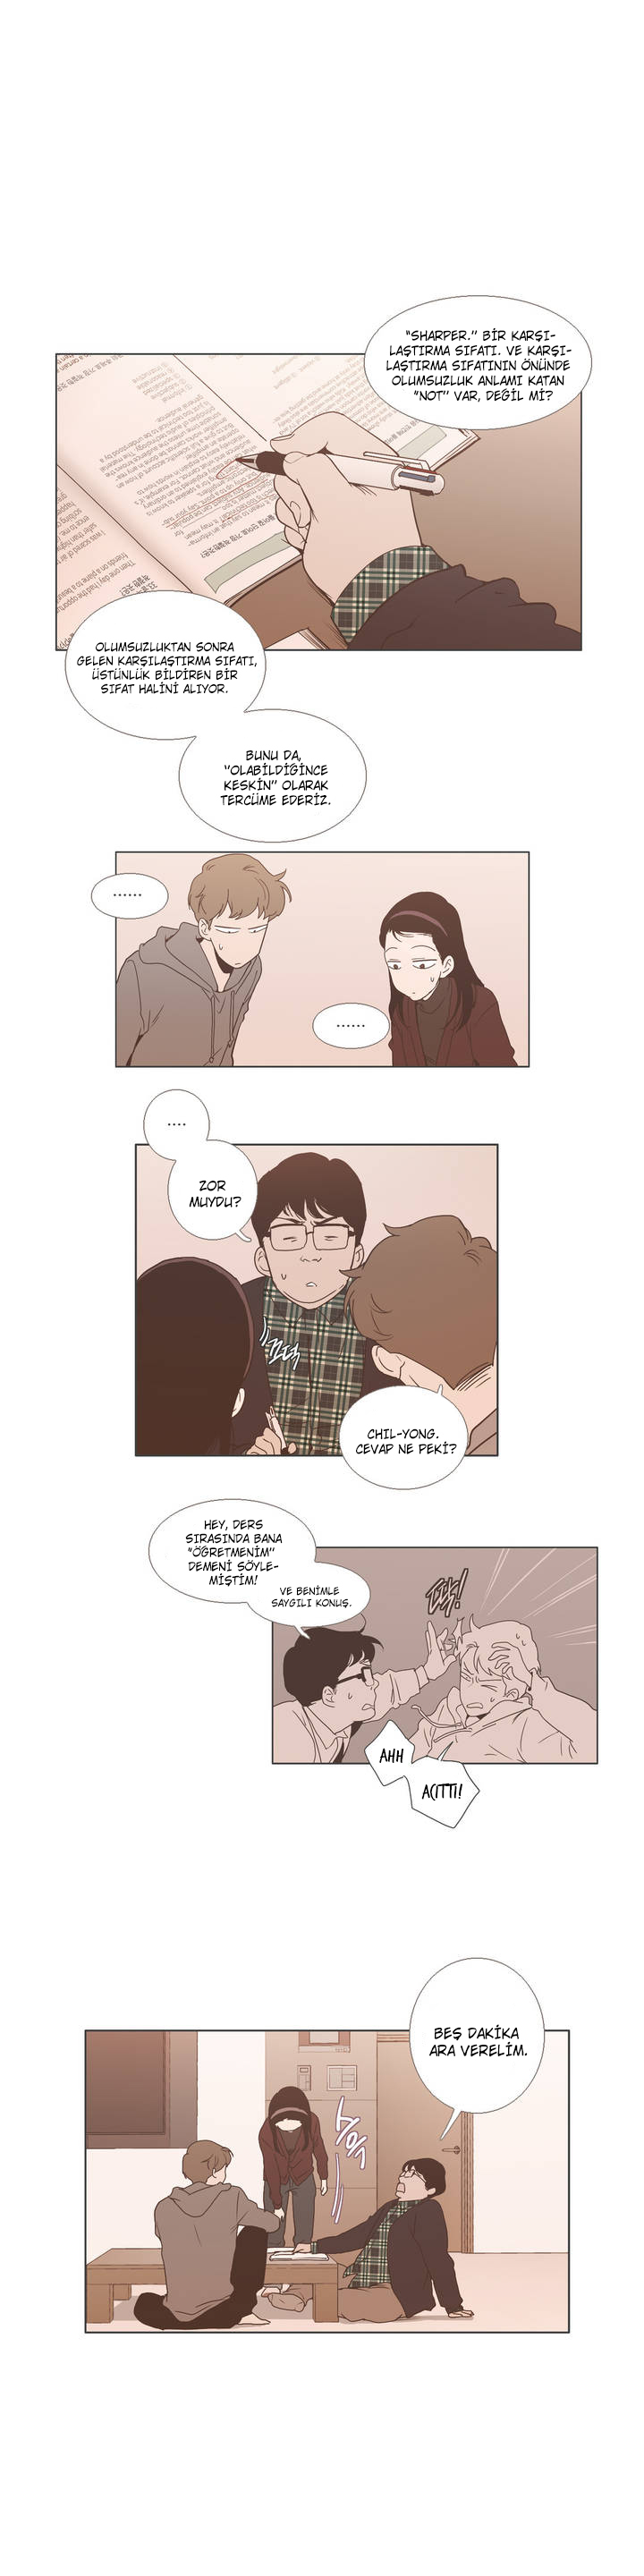 Something About Us: Chapter 07 - Page 2